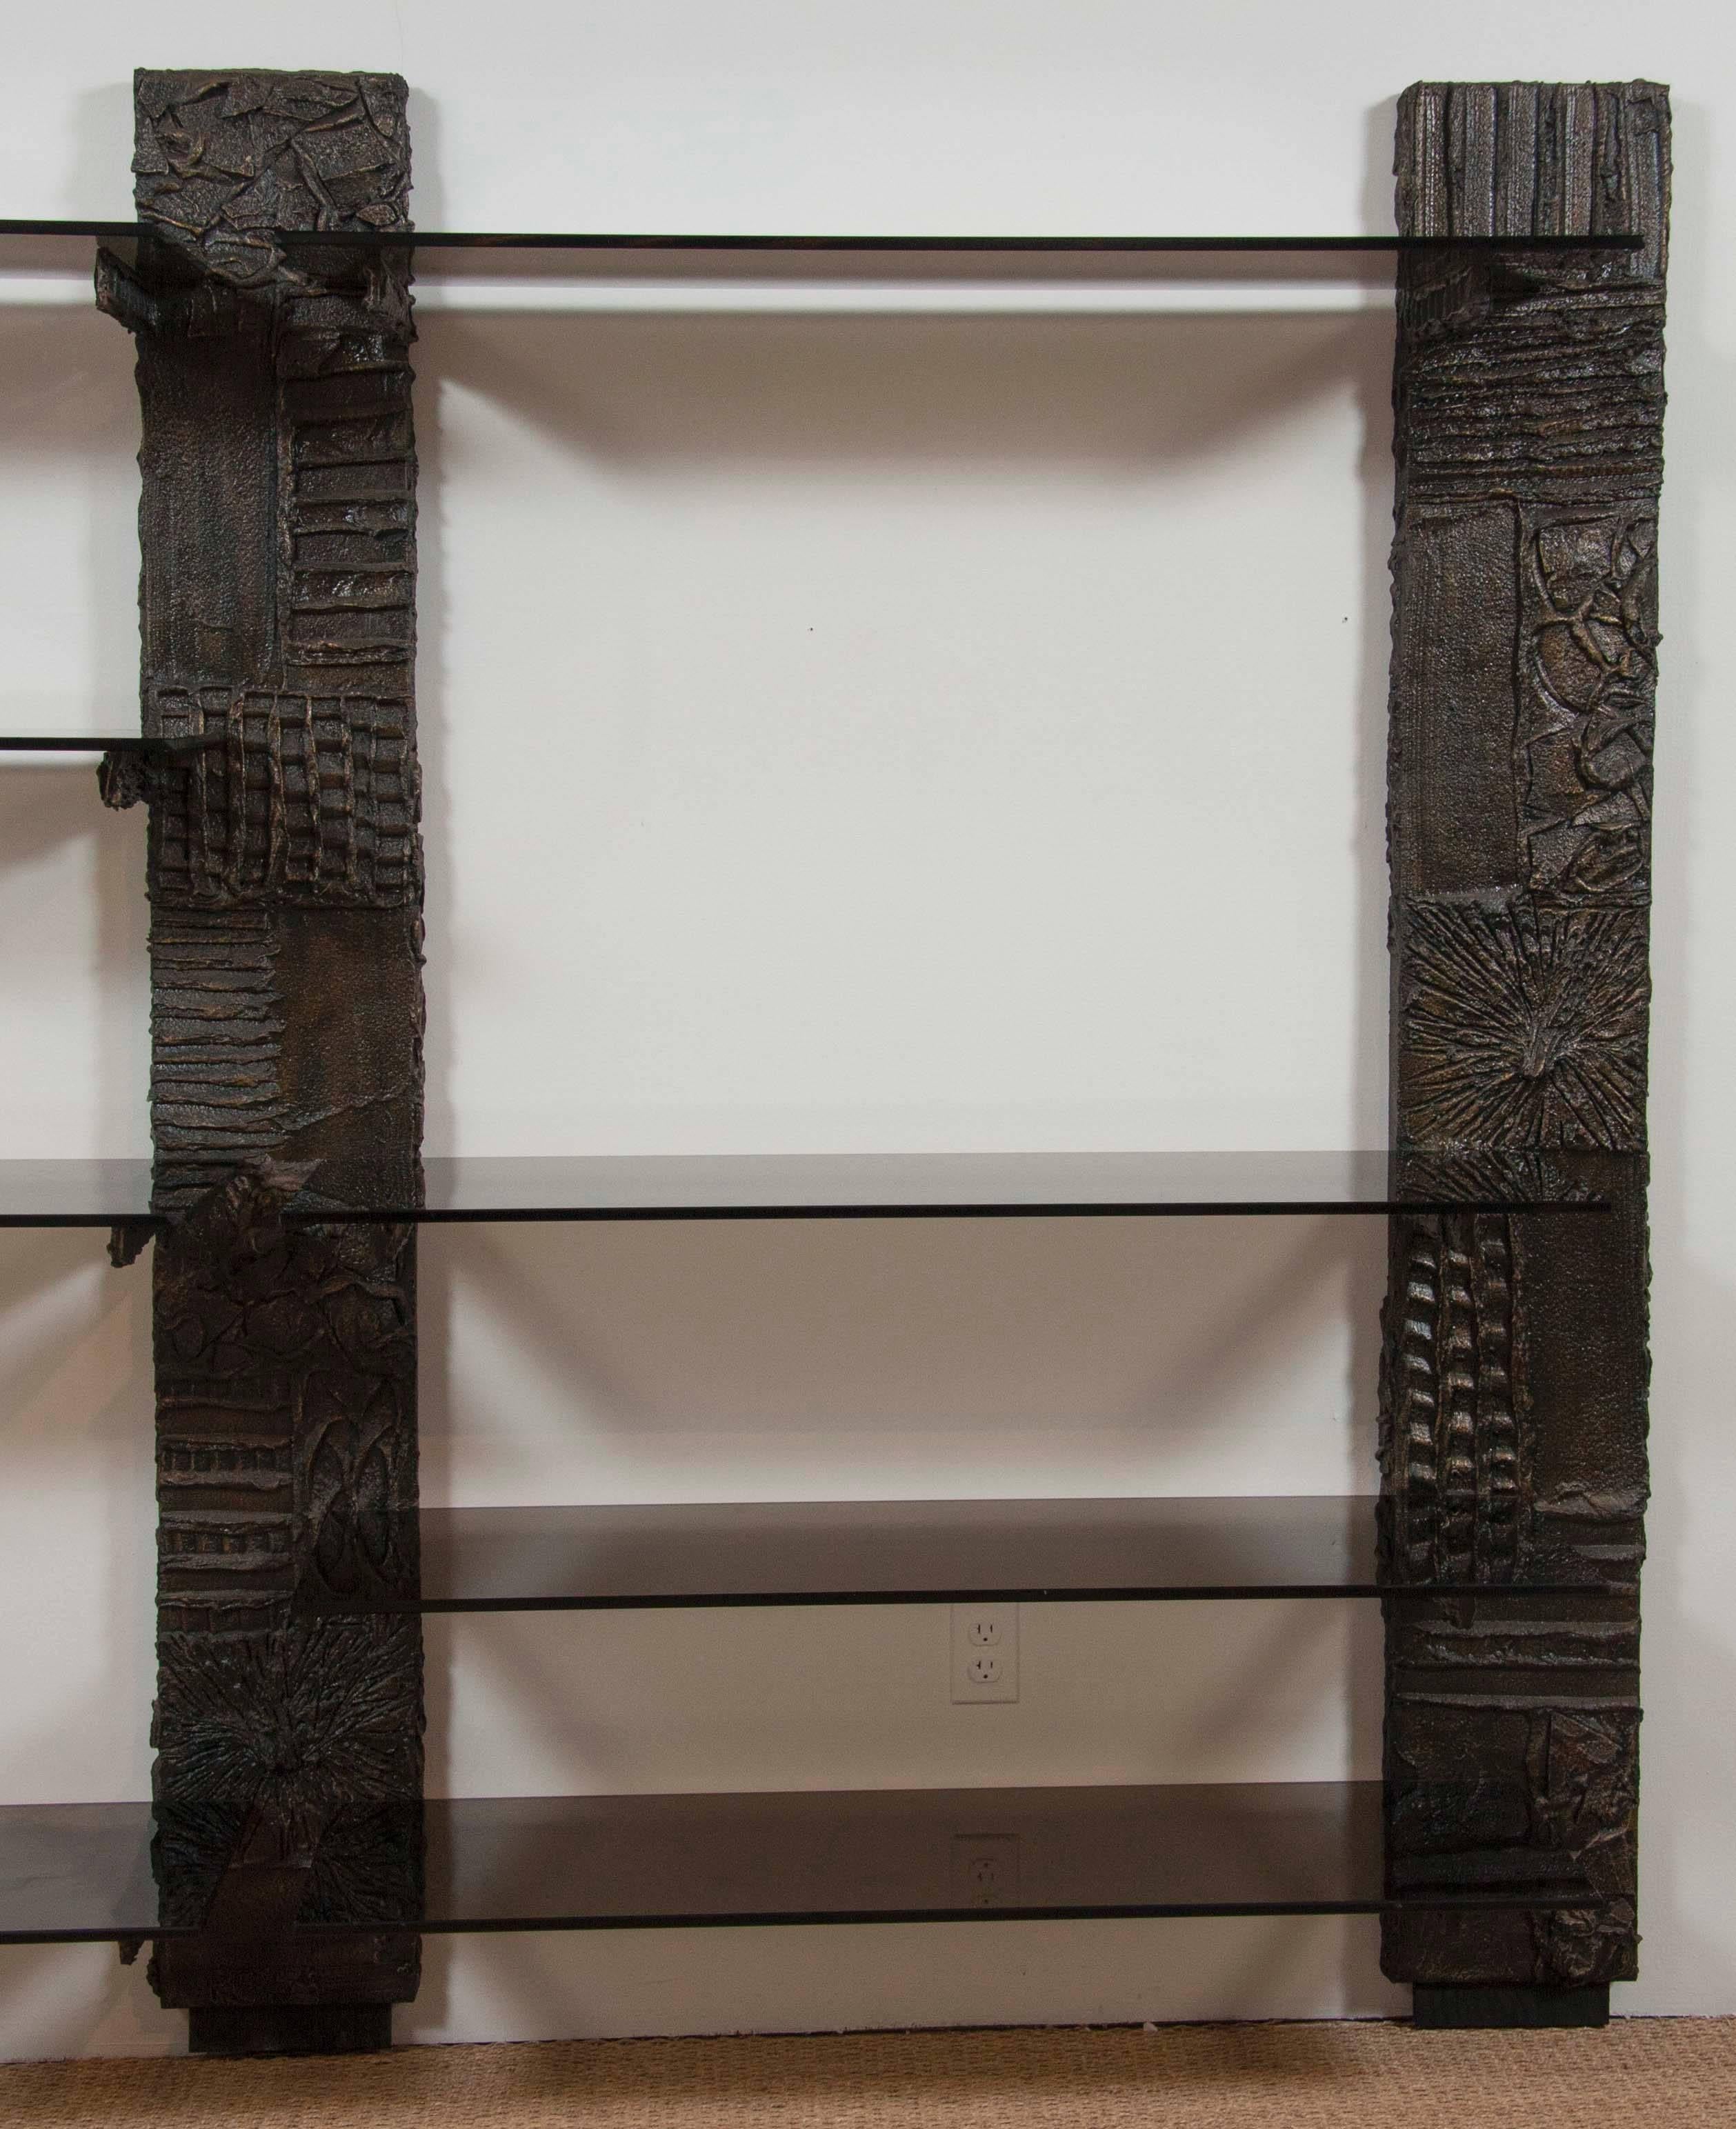 A Paul Evans Sculpted Bronze Series bookshelf with smoked glass shelves. Signed 